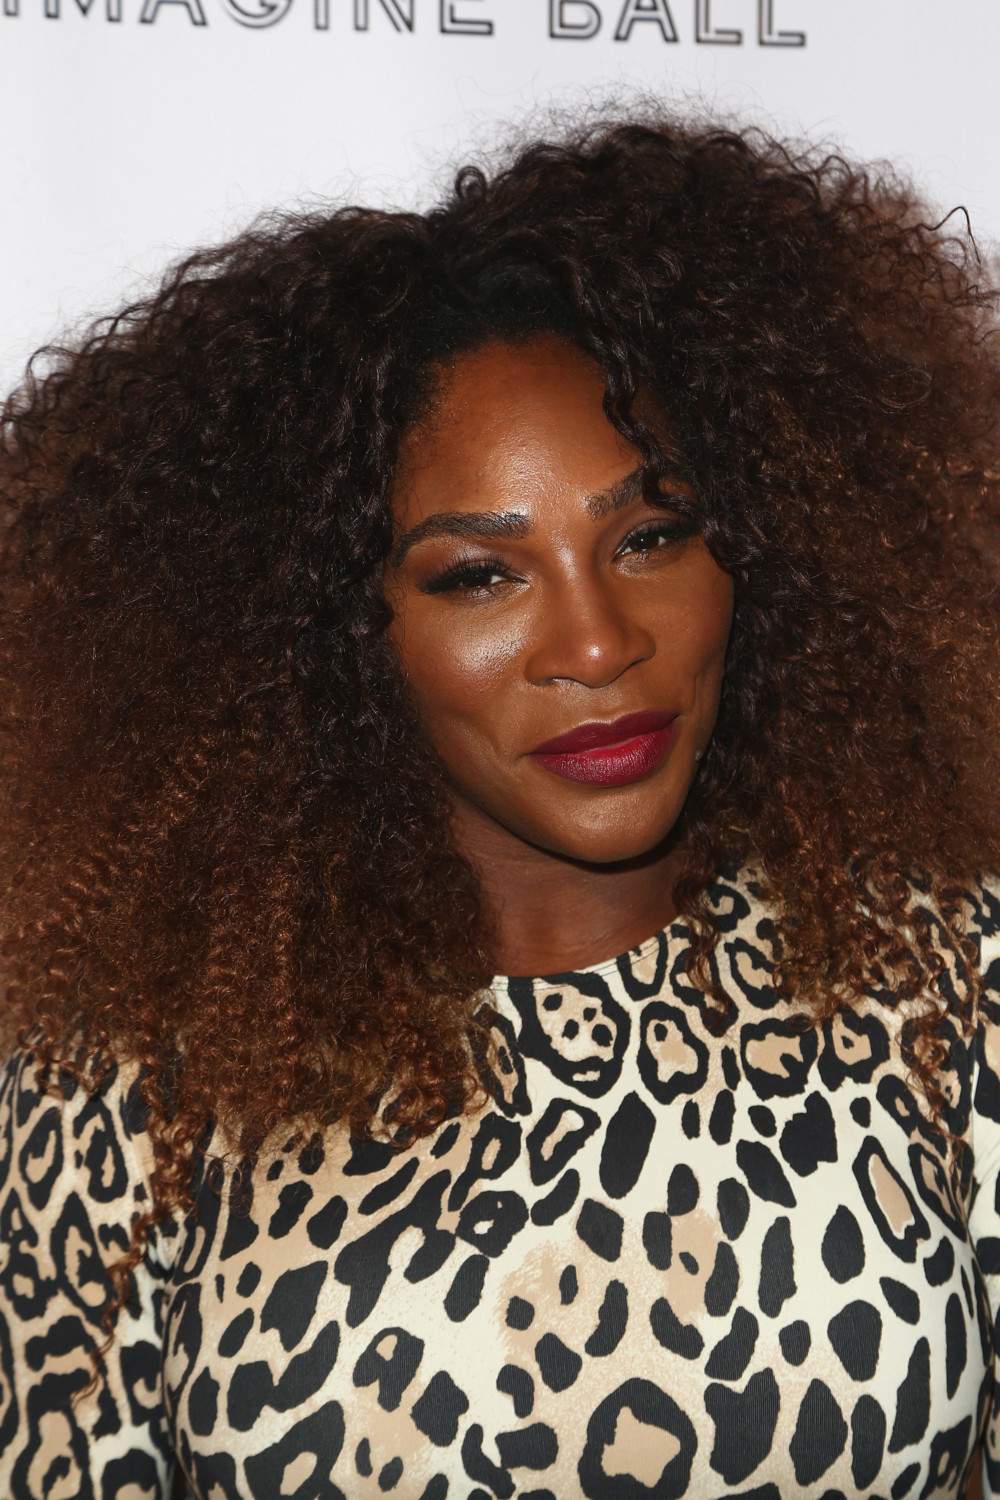 Serena Williams Honored for her Charitable Work at 2018 Imagine Ball